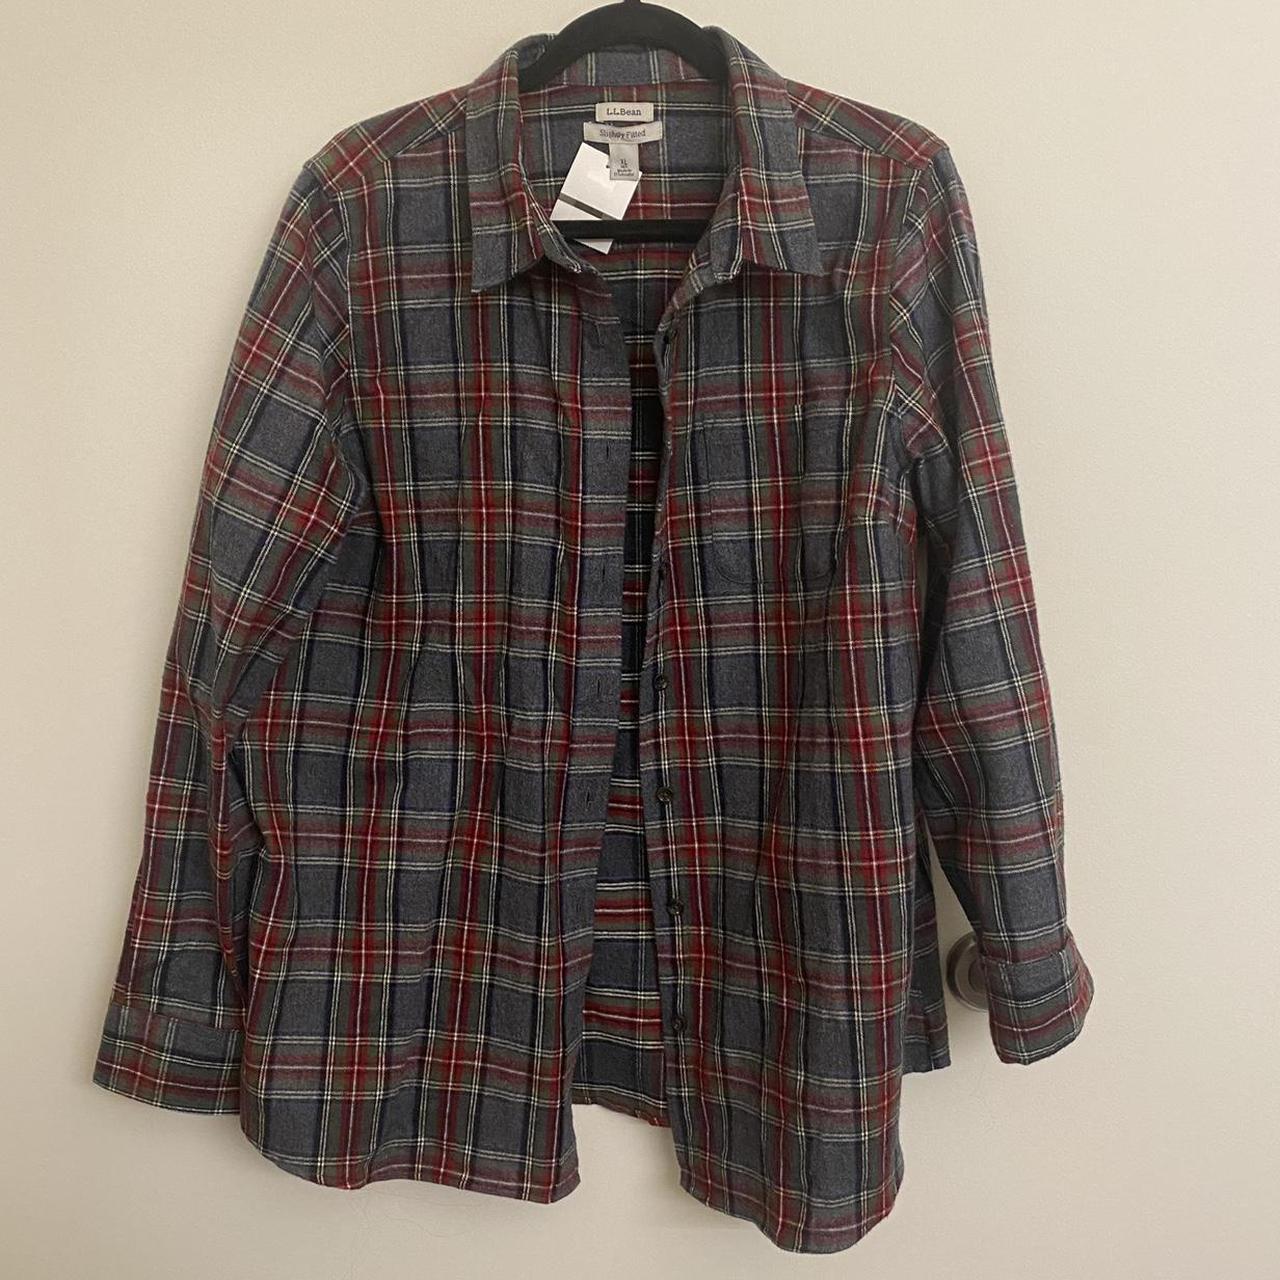 Product Image 3 - Thick & warm flannel from